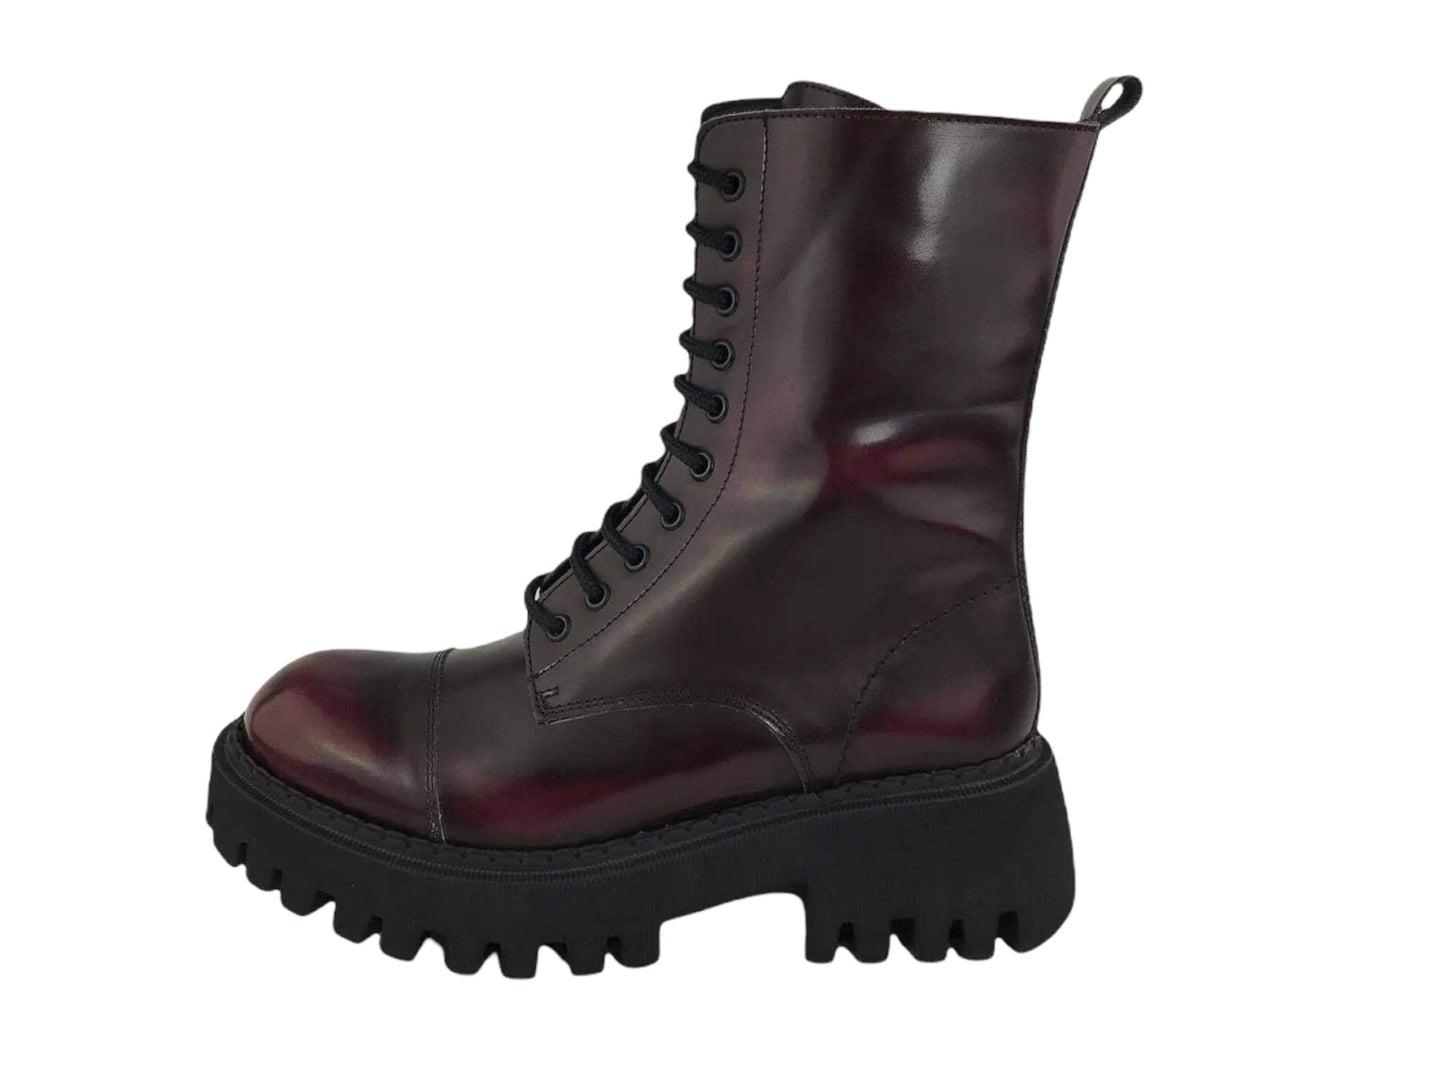 marnate | Women's Zareb military boots in maroon waxed leather